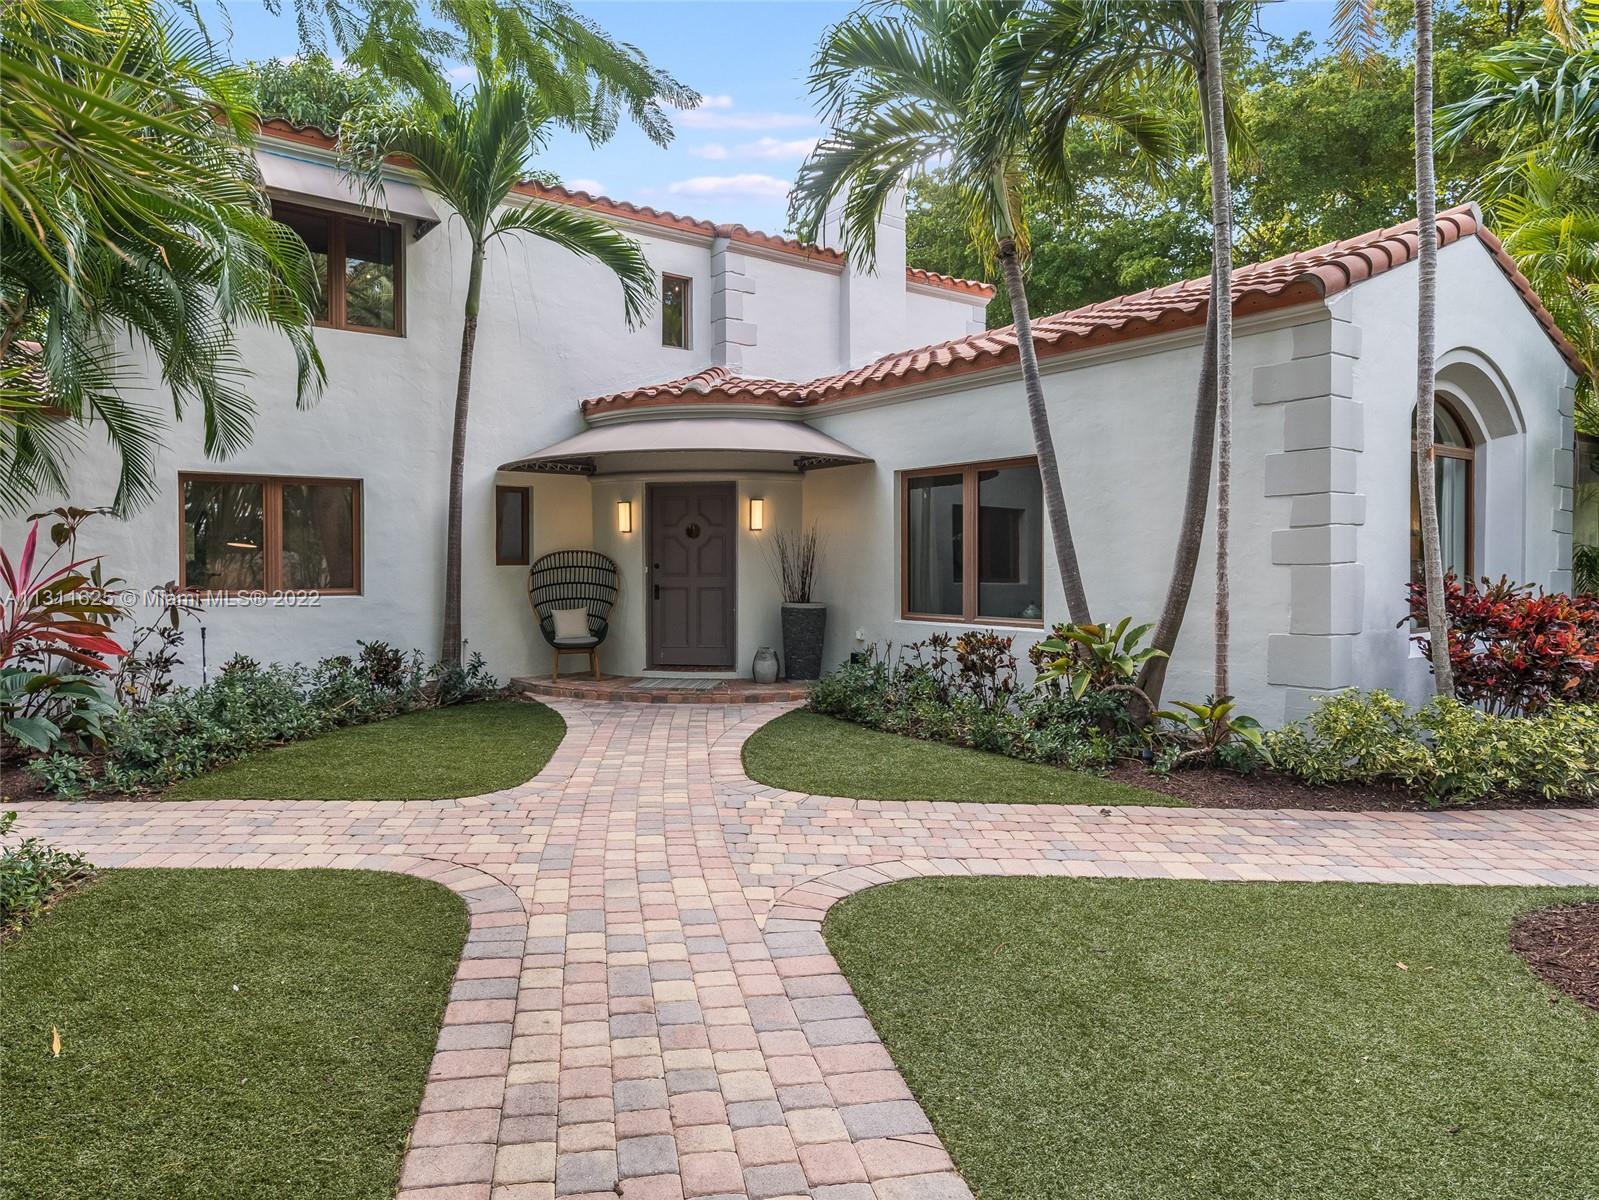 Rare opportunity to own a classic Miami Beach home tucked away on a quiet street in the highly desir